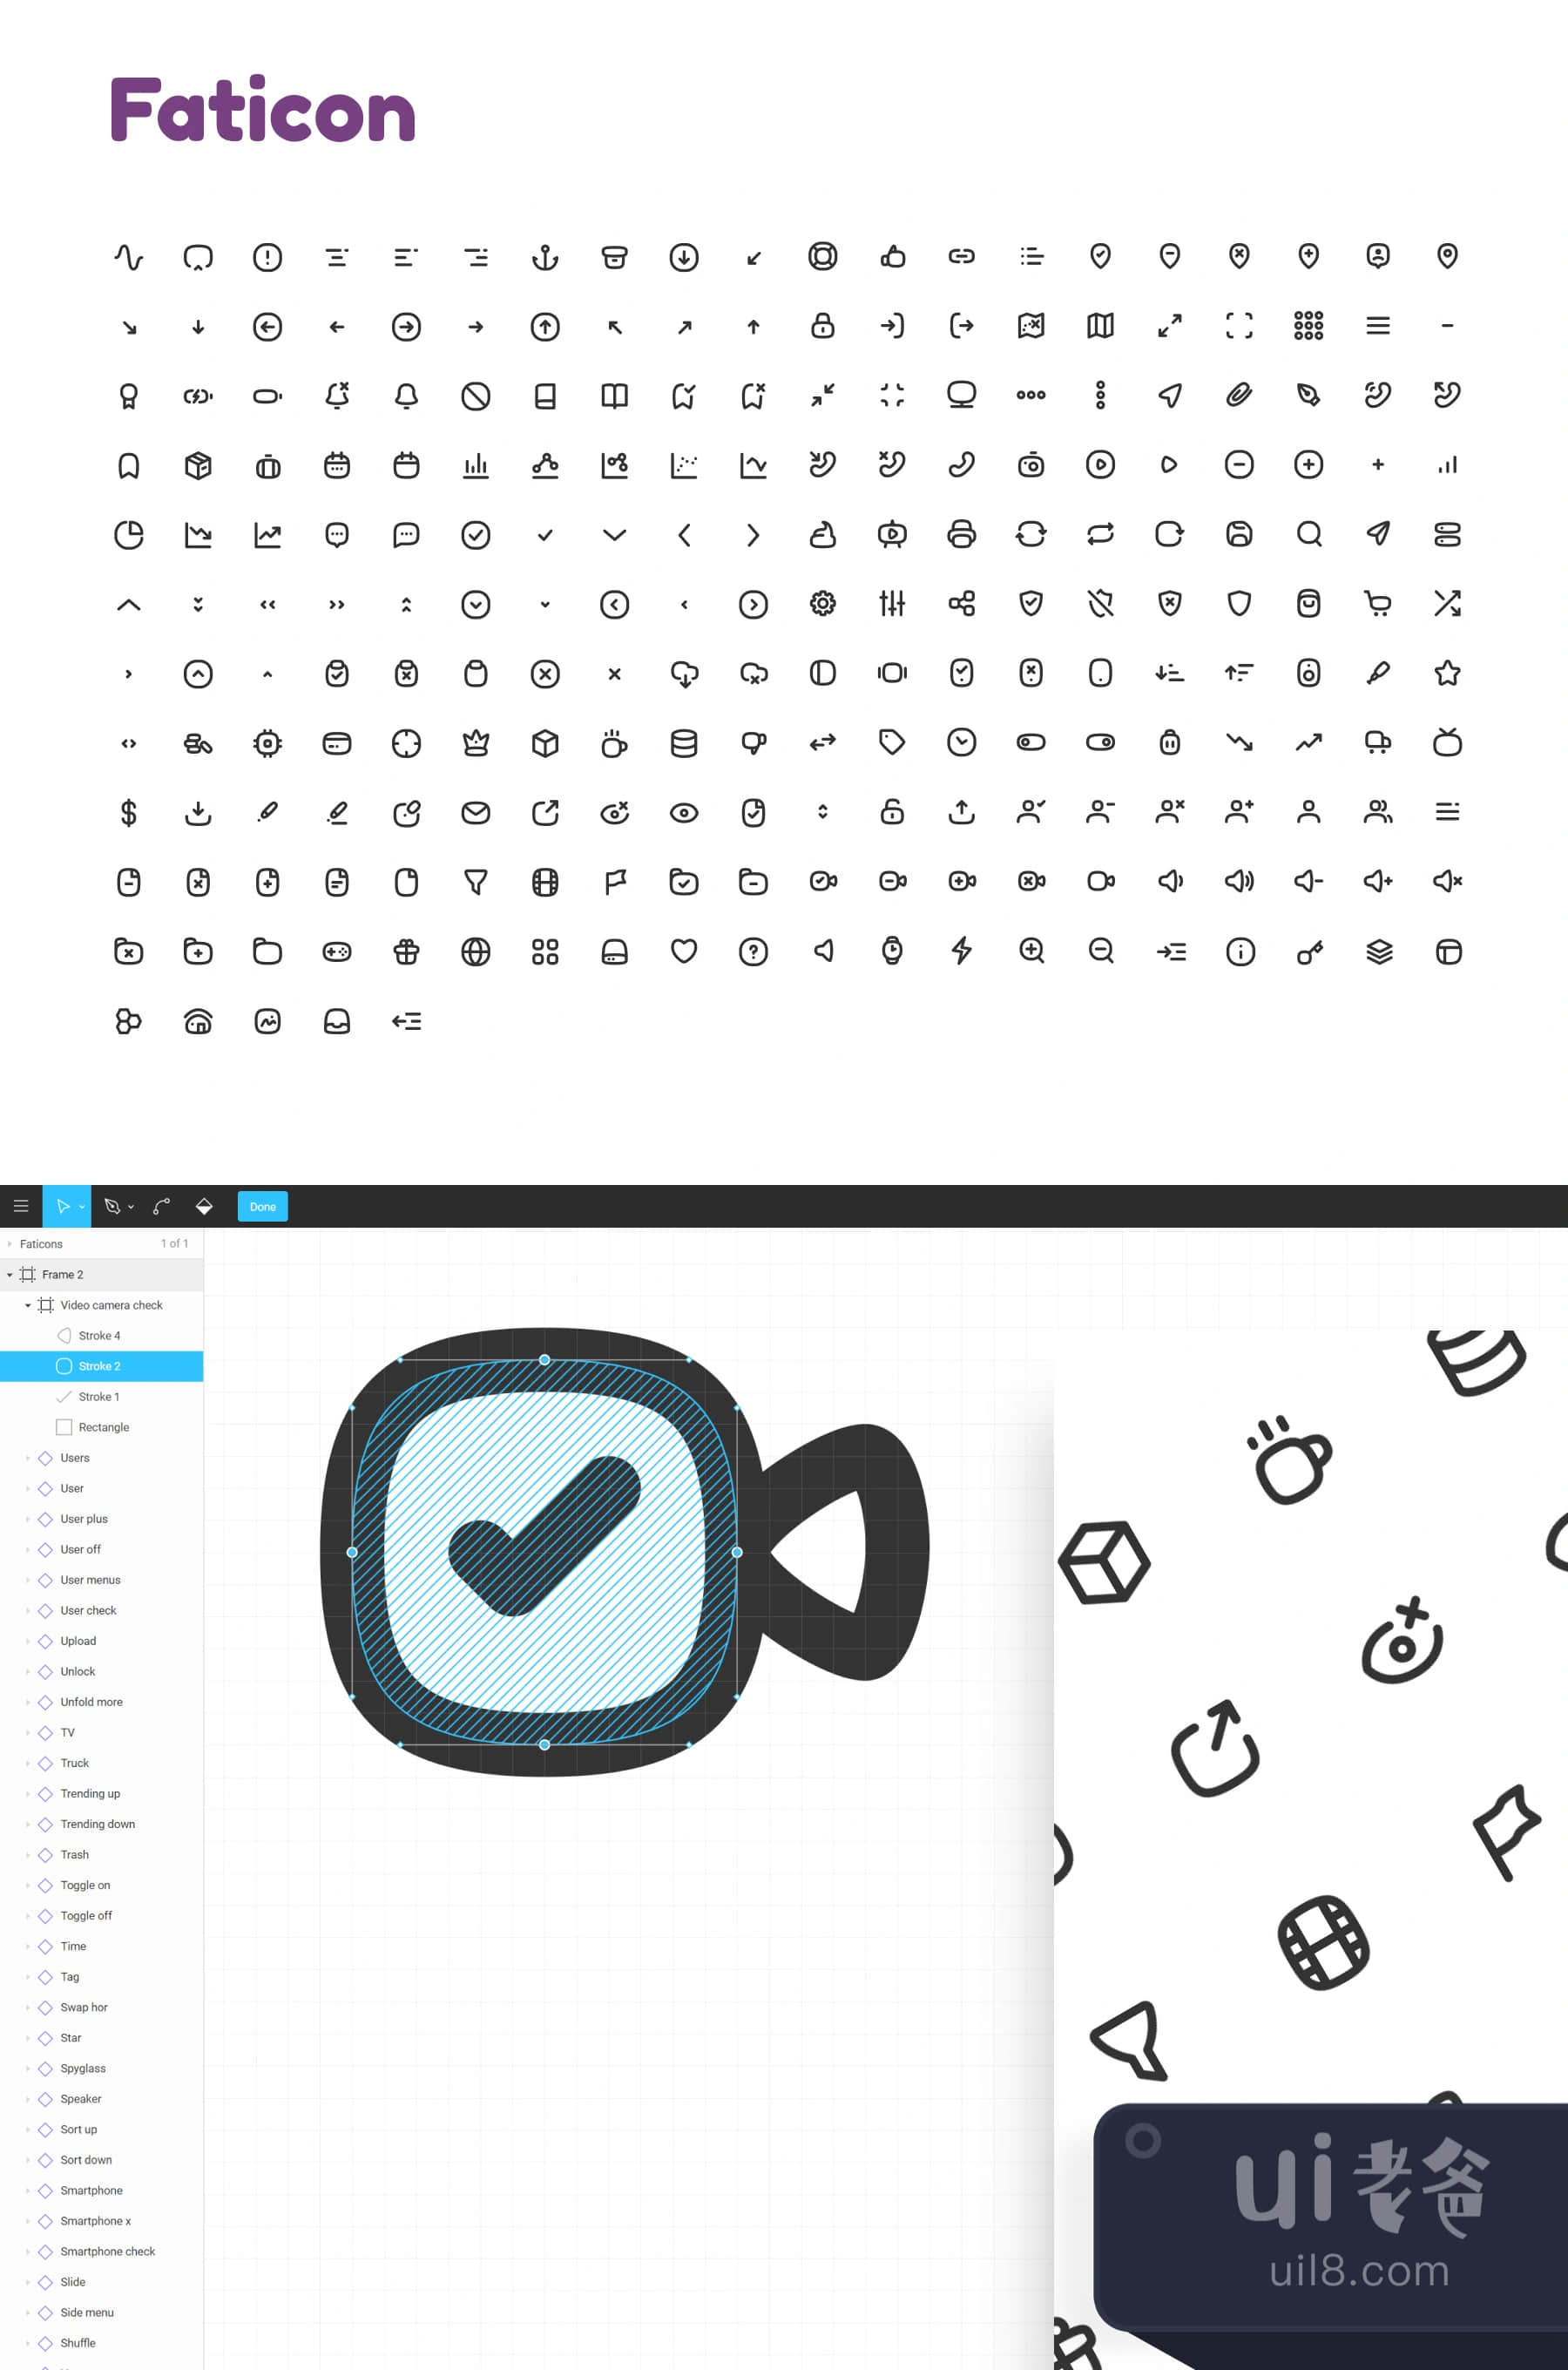 Faticon线条图标包 (Faticon Line Icons Pack)插图